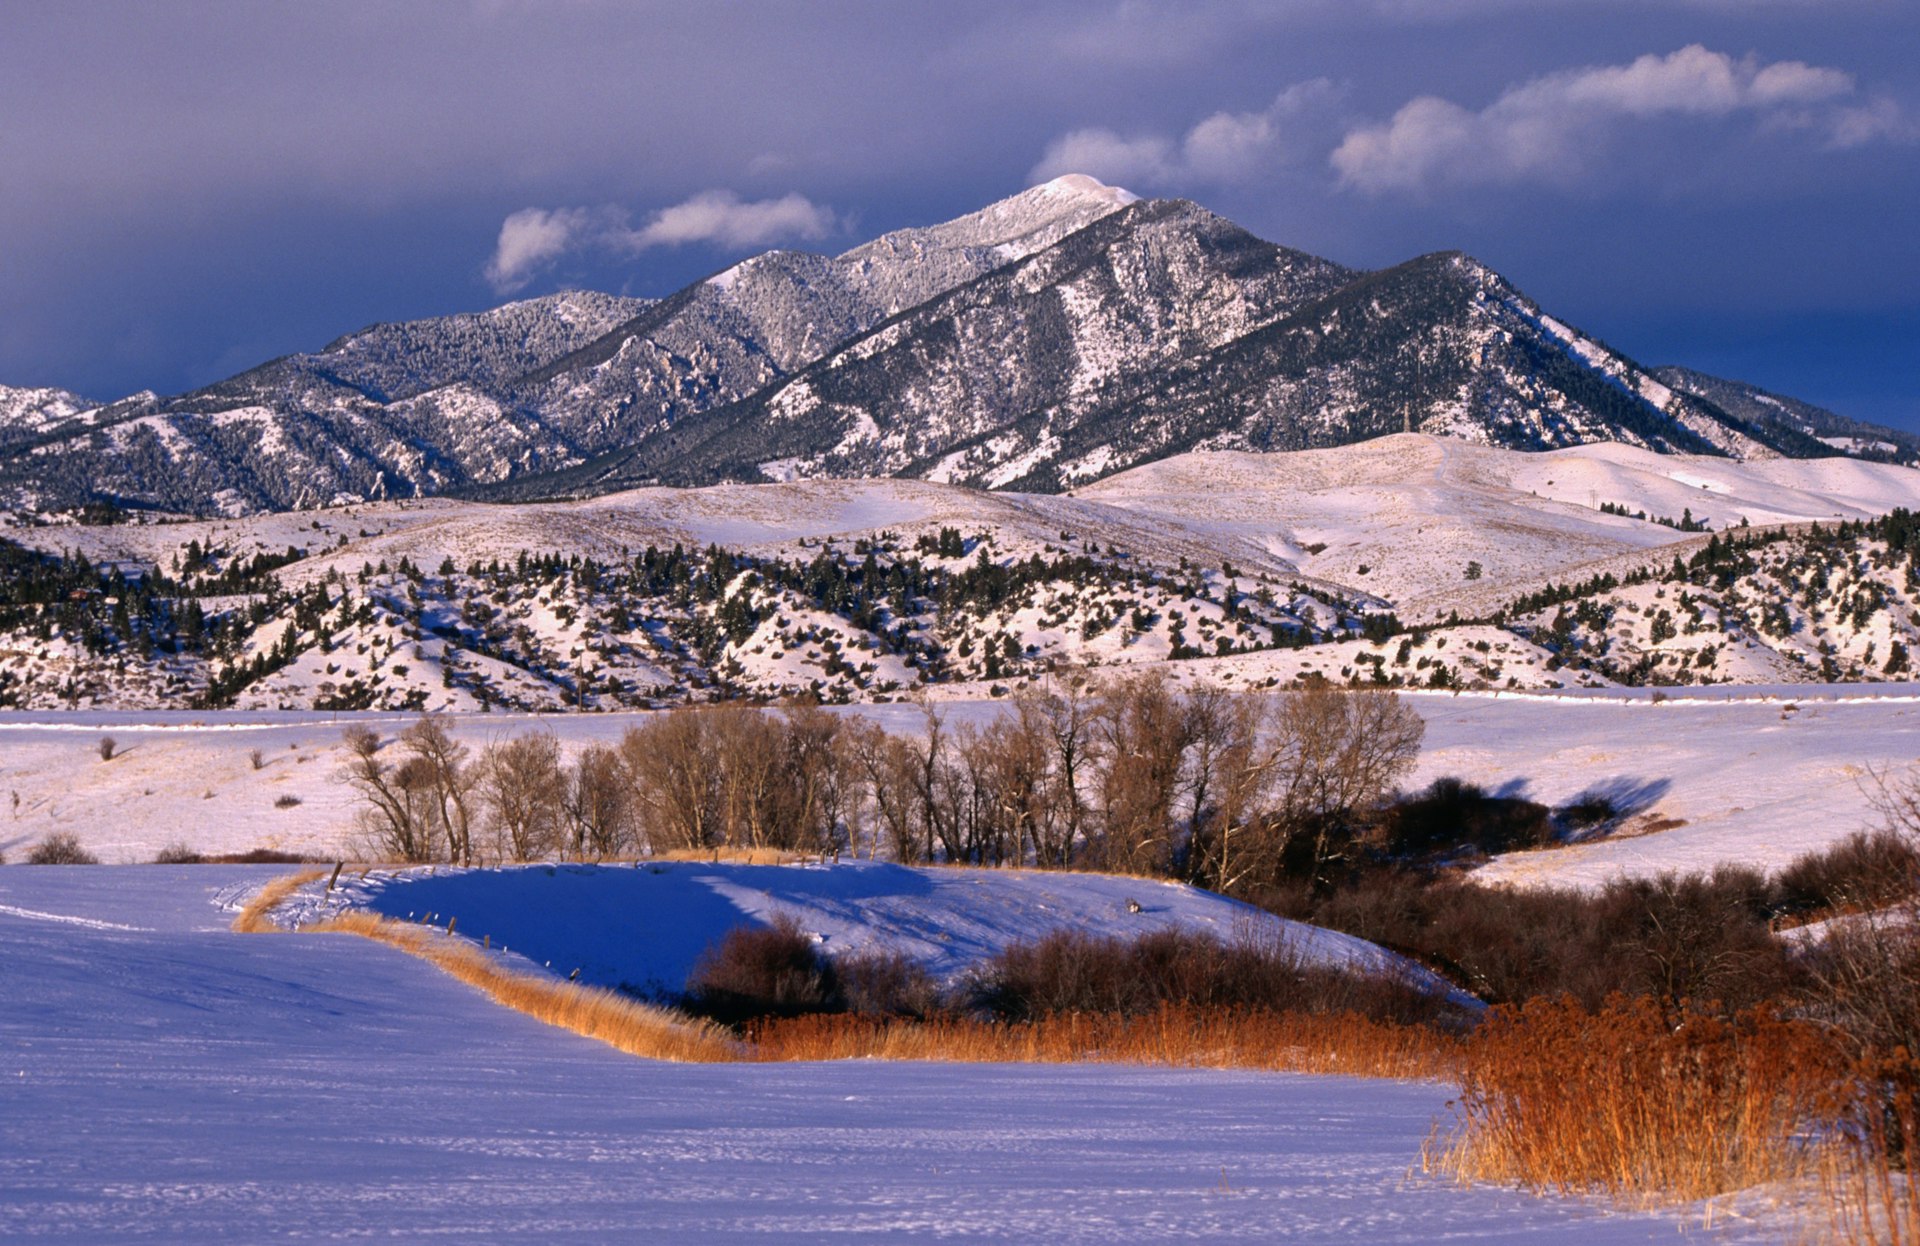 The snow-capped peaks of the Bridger Mountains in winter